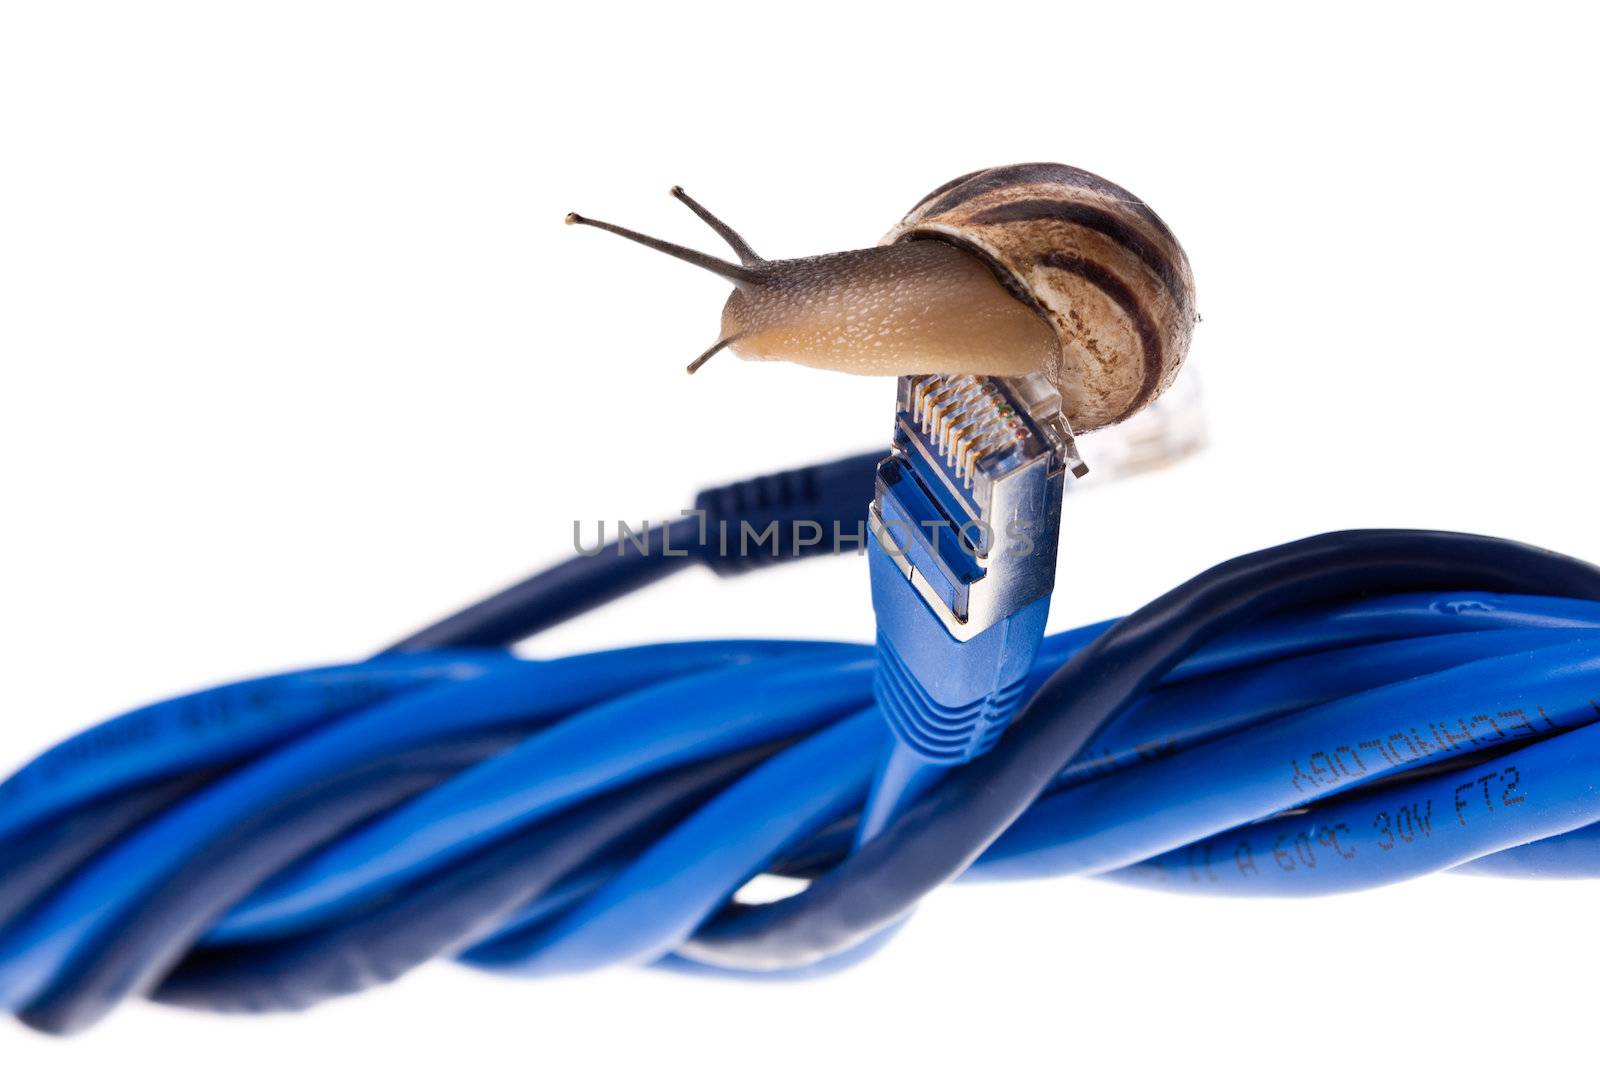 Snails moving on twisted lan cables